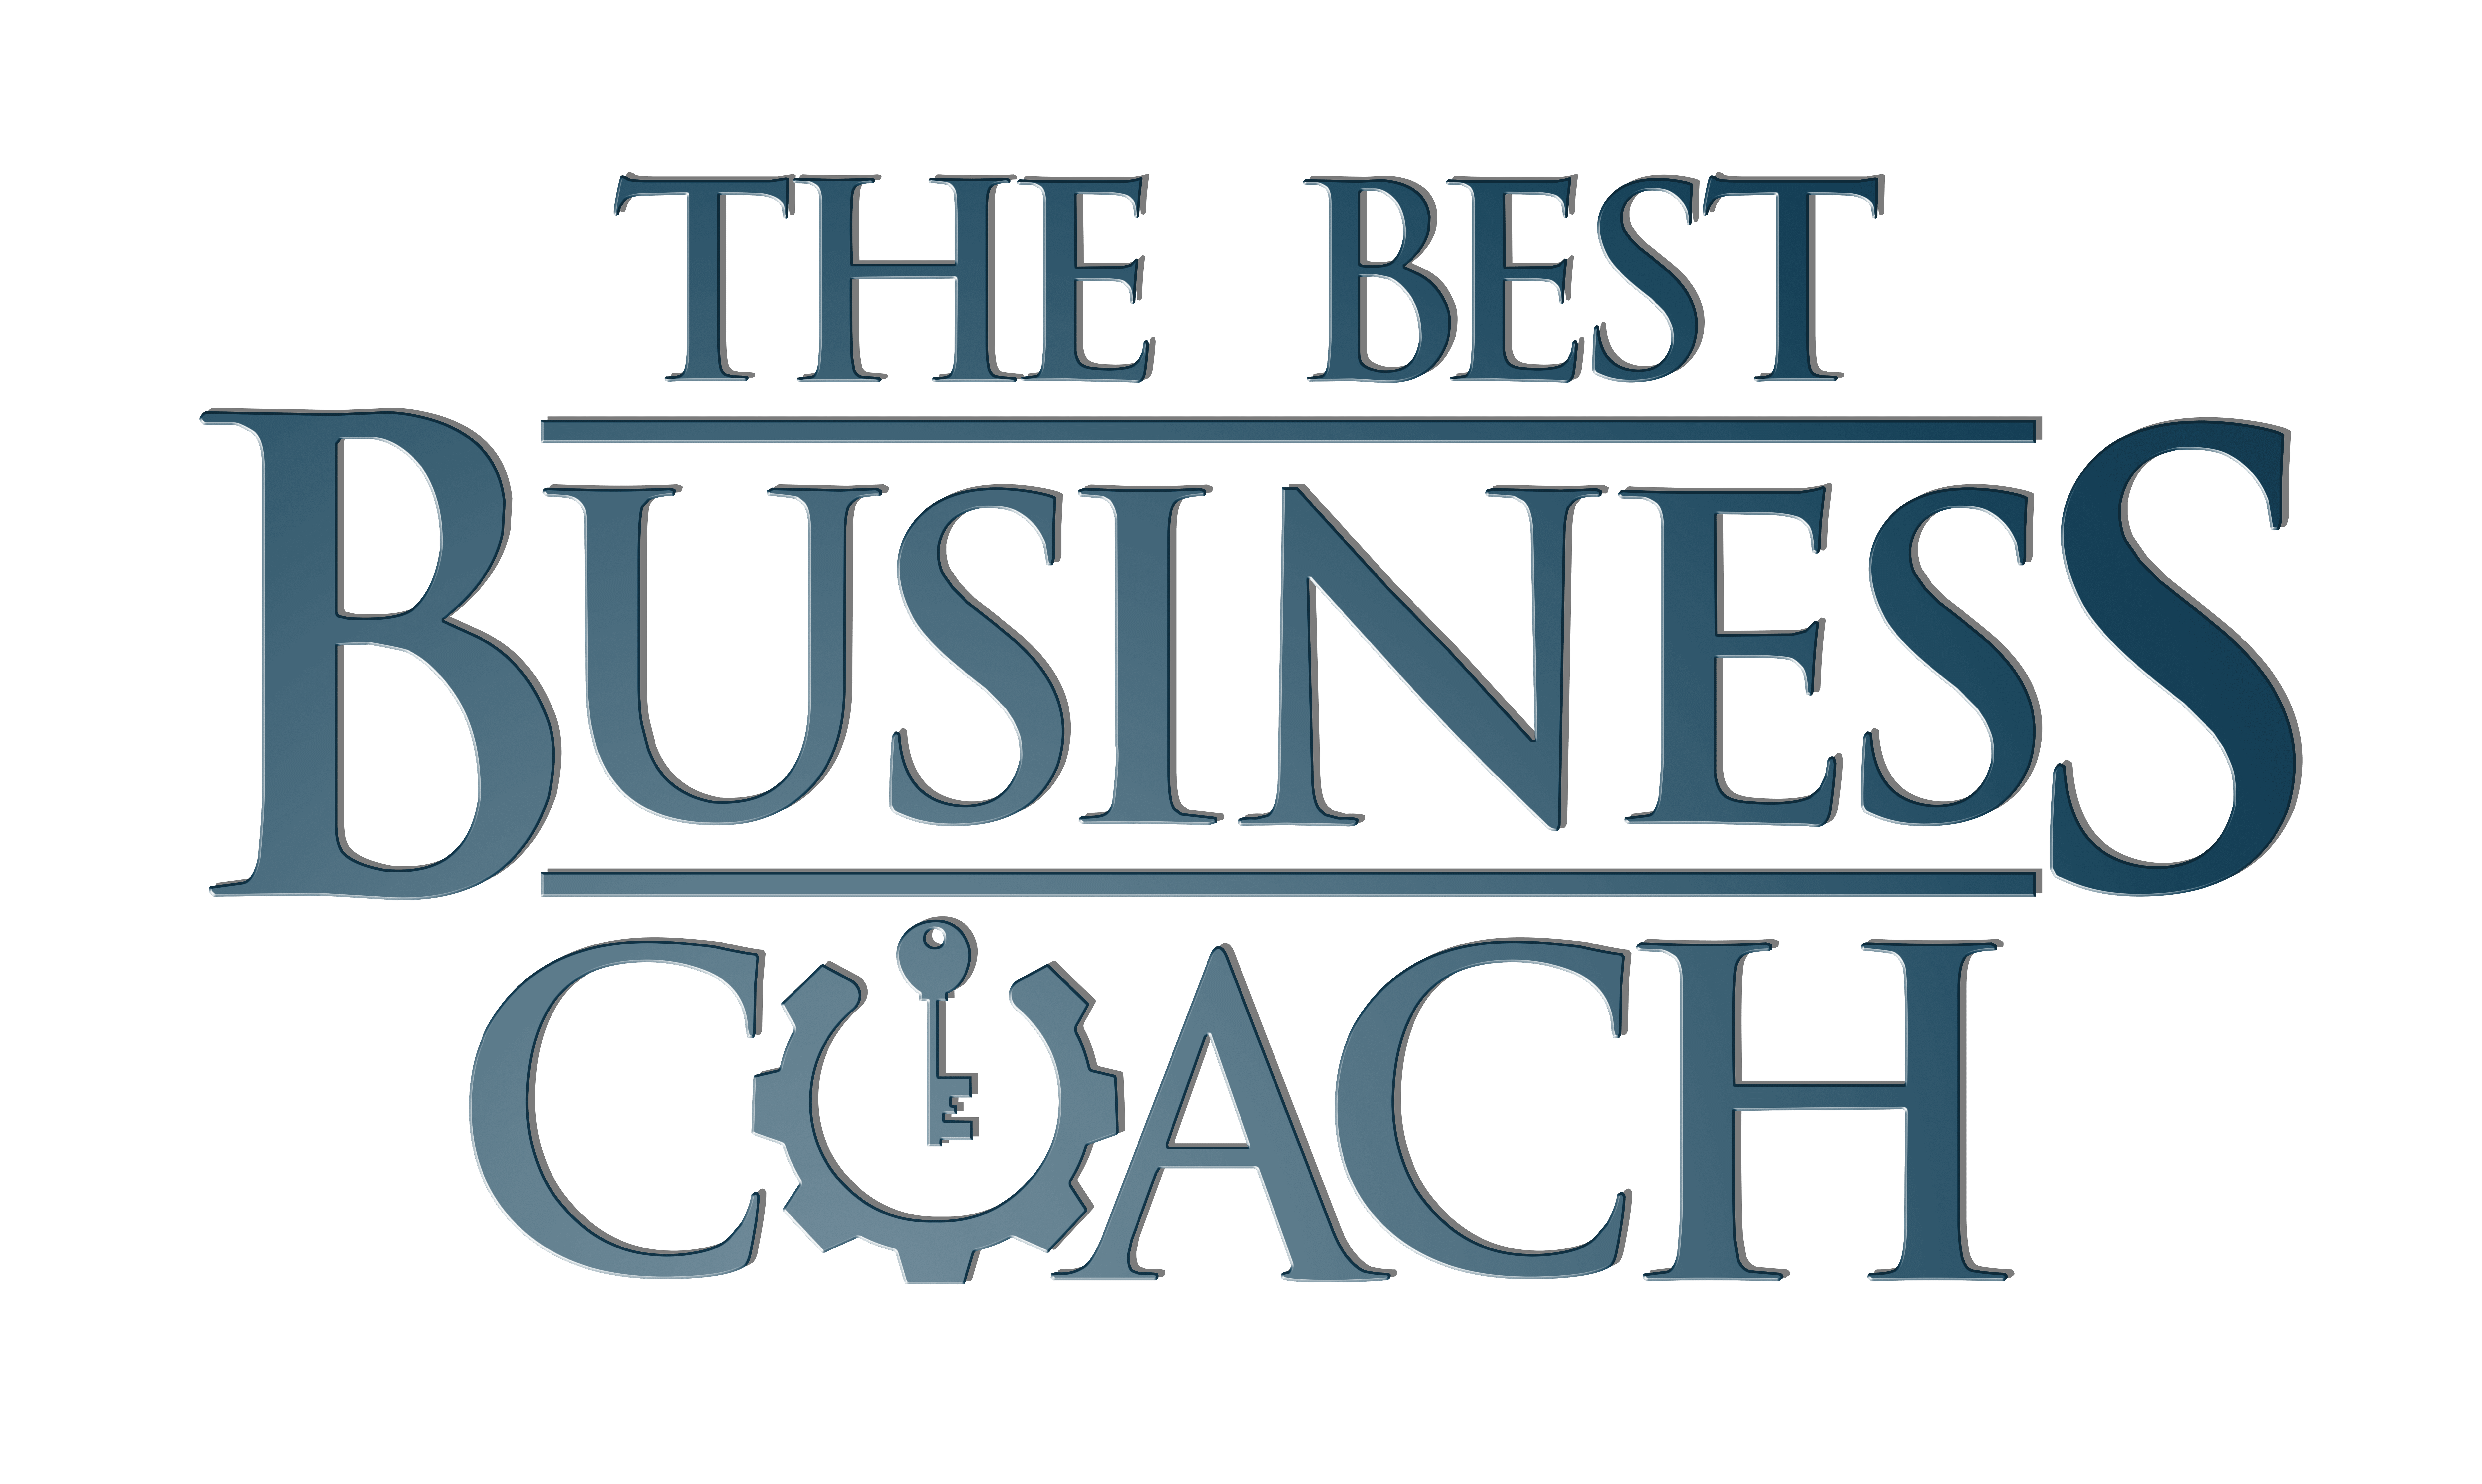 The Best Business Coach